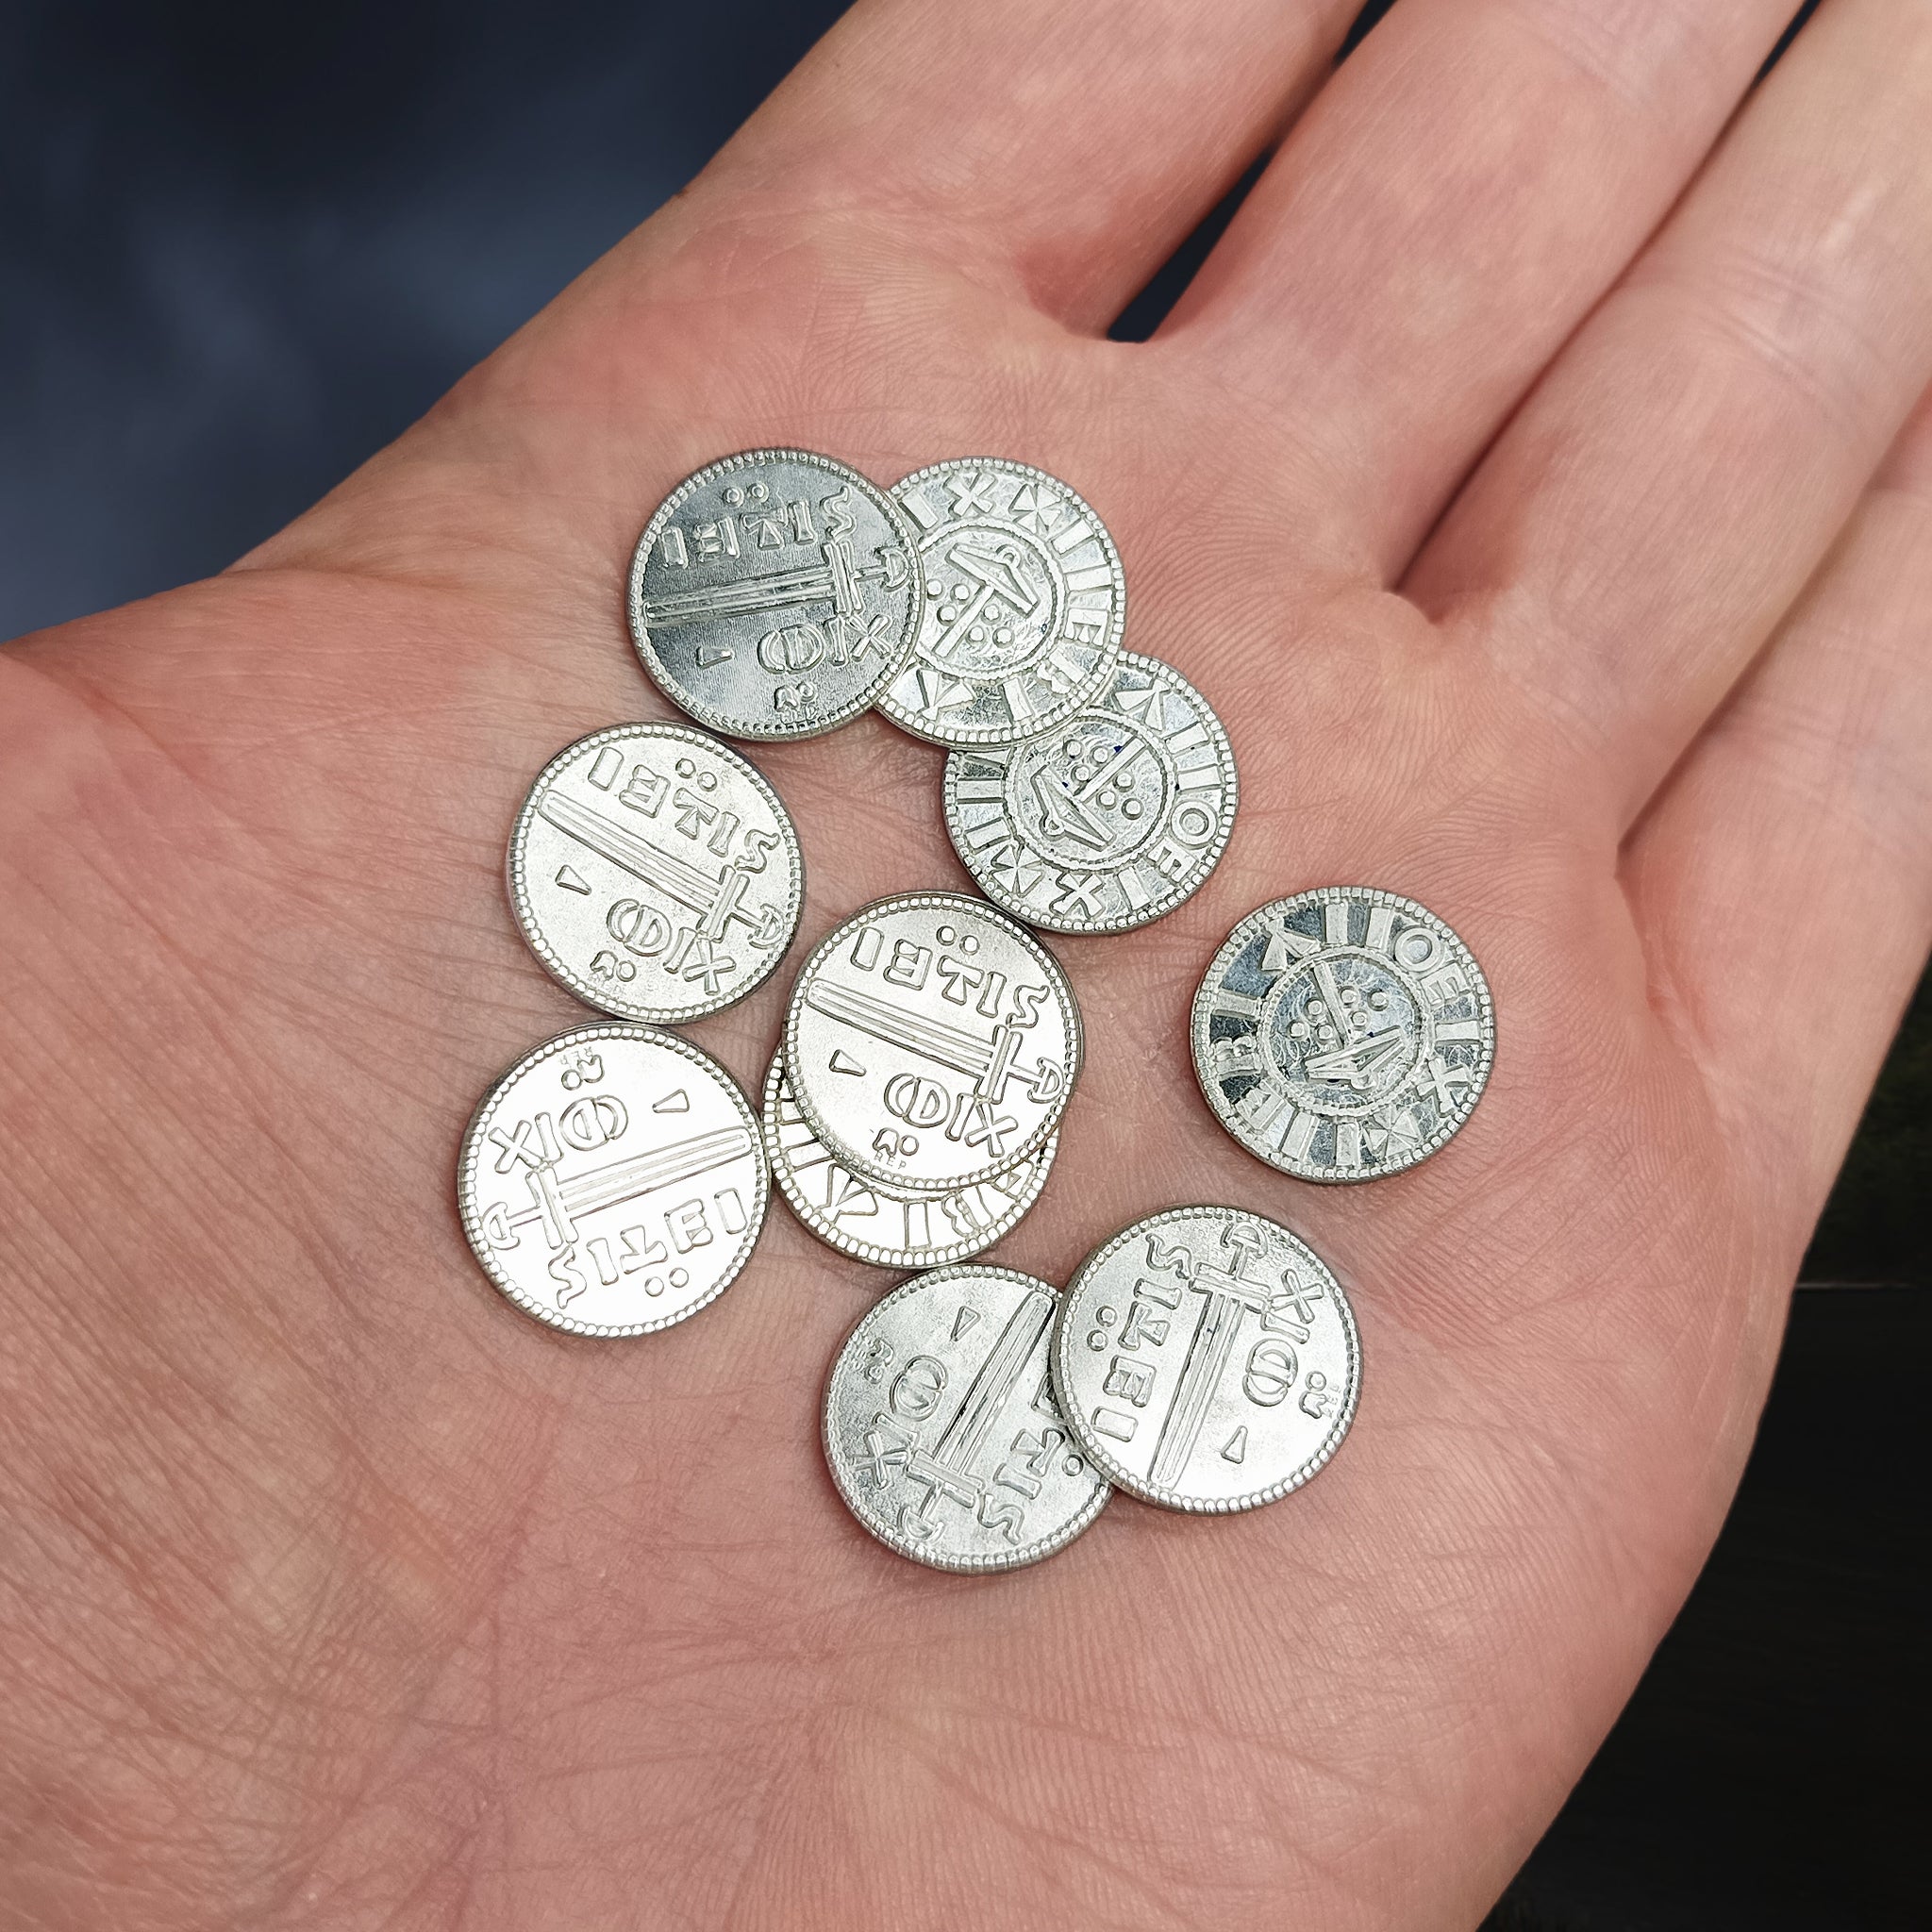 Replica Coins from Viking Age York, England, UK on Hand x 10